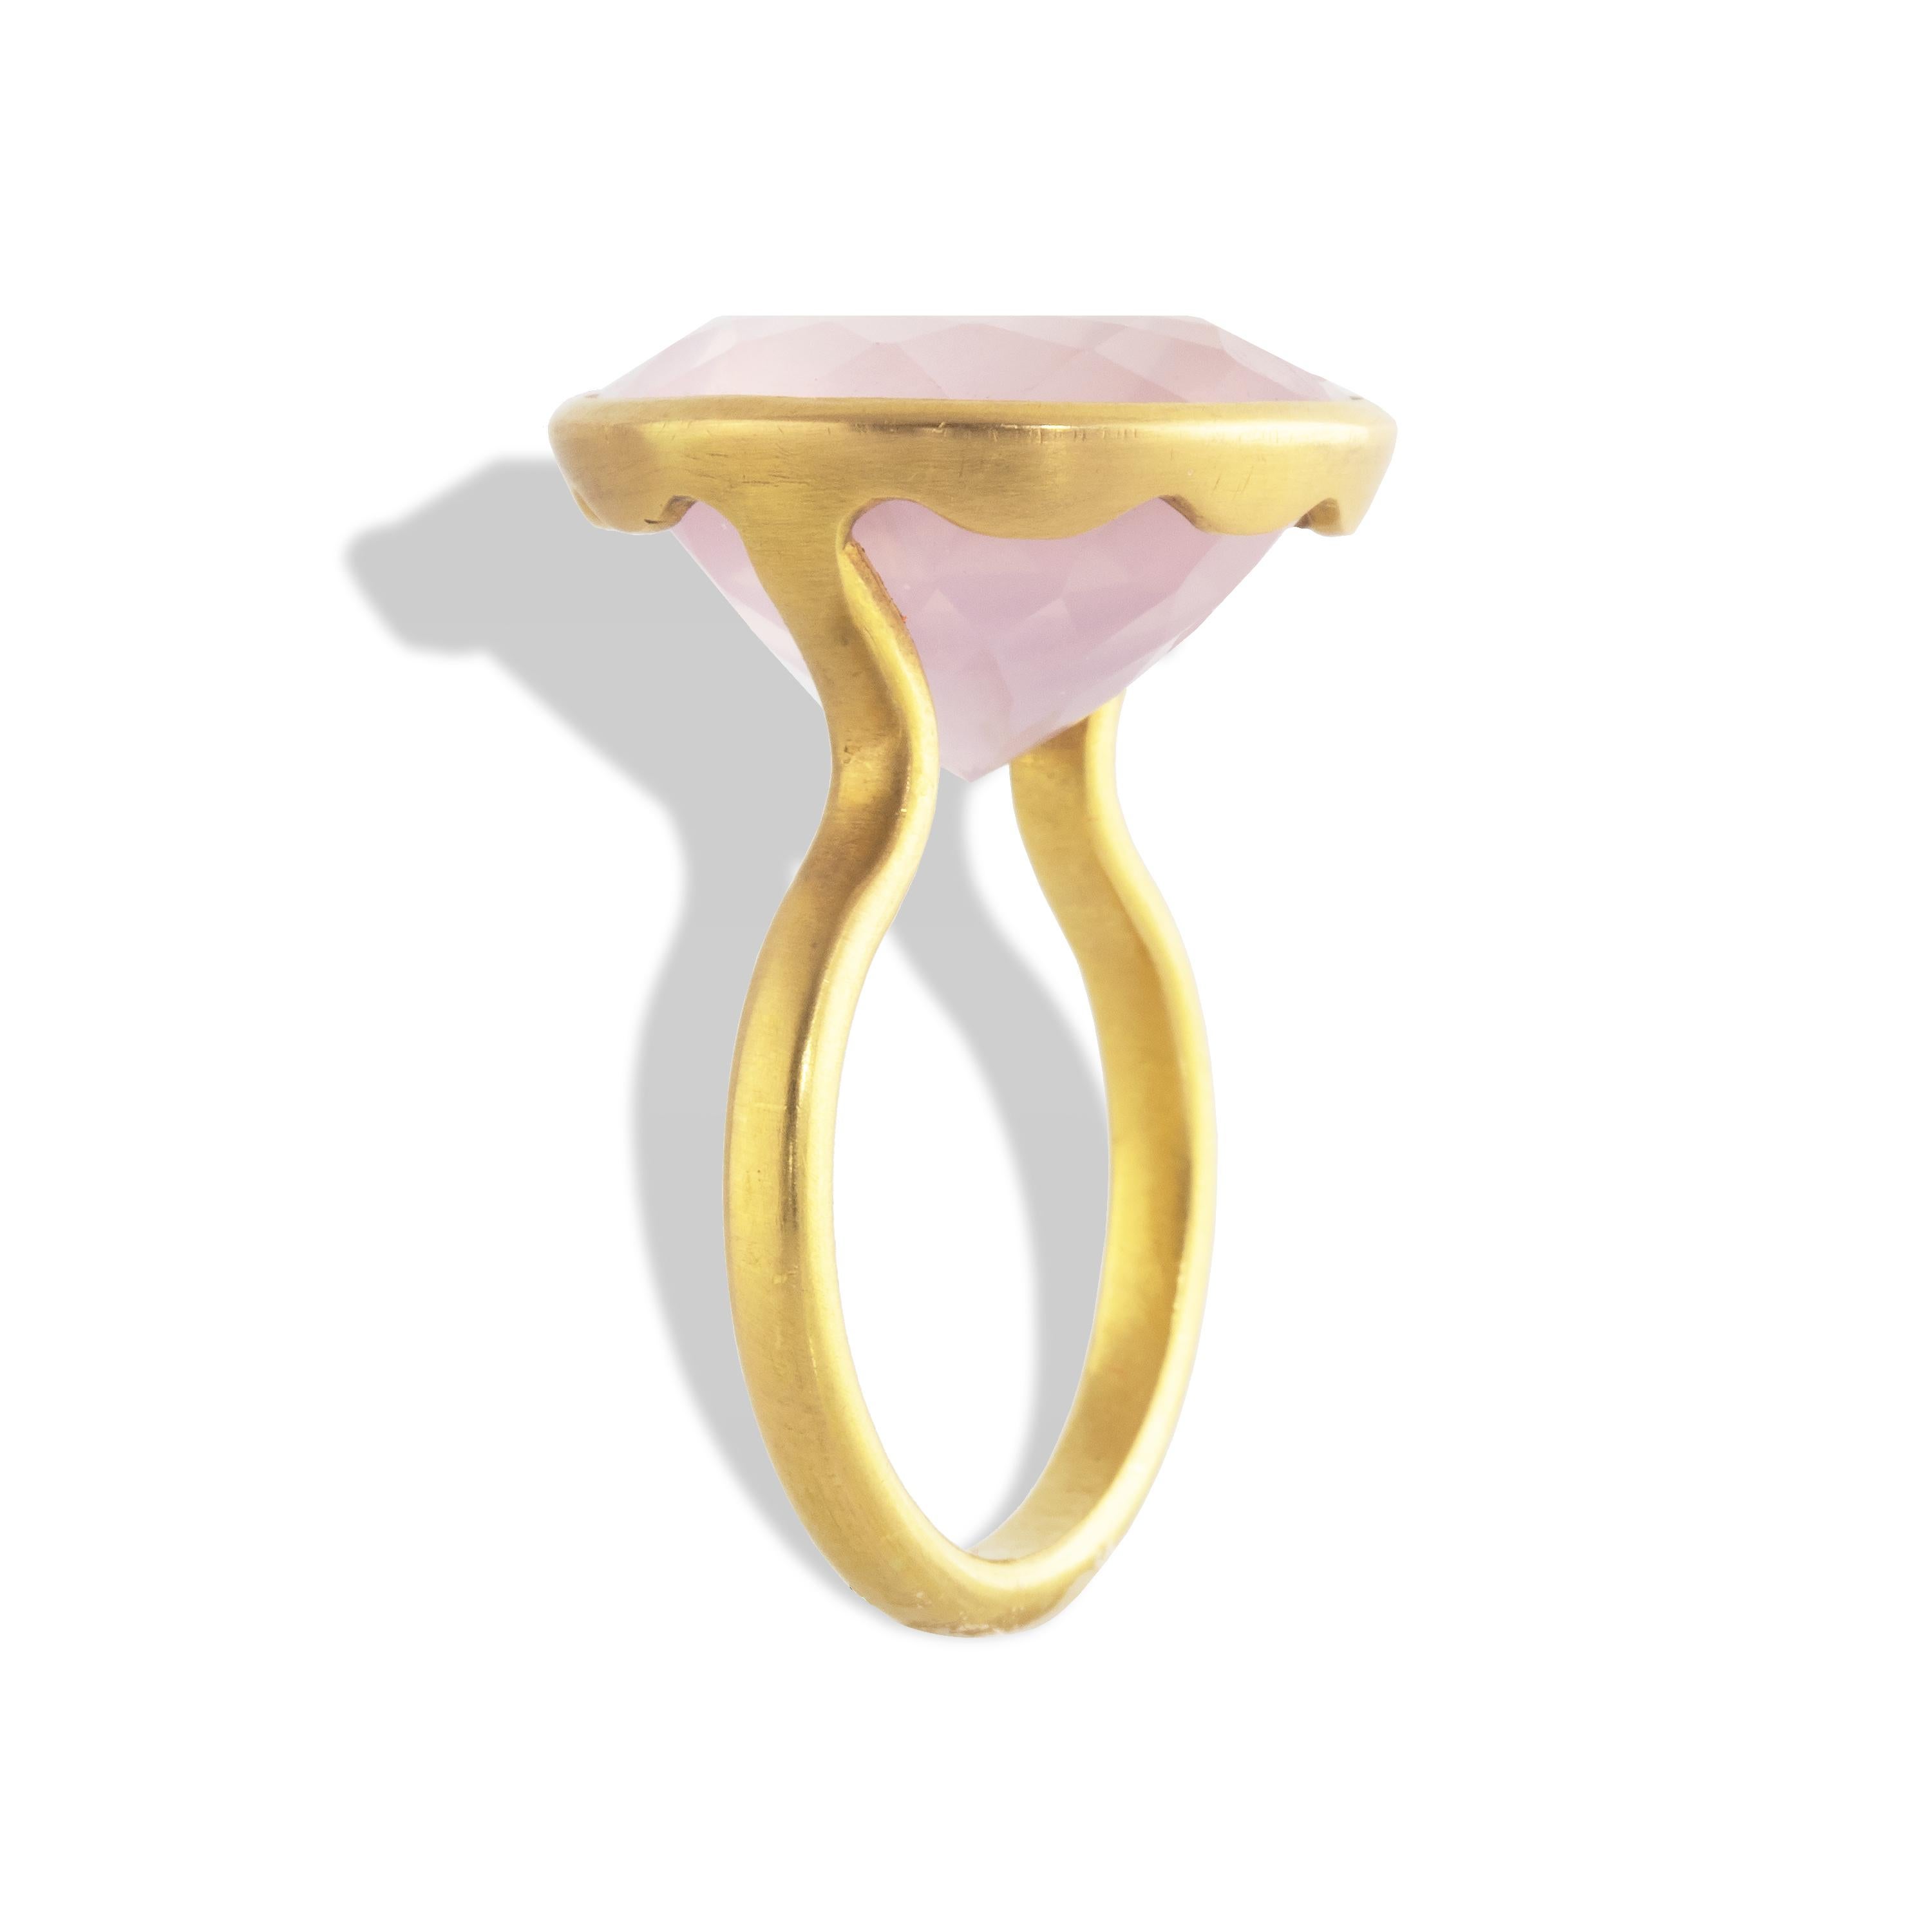 Spectacular 25 carat Rose Quartz Round Wave Ring set in 22k matte yellow gold.  

In Greek myth, Aphrodite was caught by a thorn when she rushed to help her wounded lover, Adonis. Blood from both lovers dripped onto a crystal, staining it pink as a